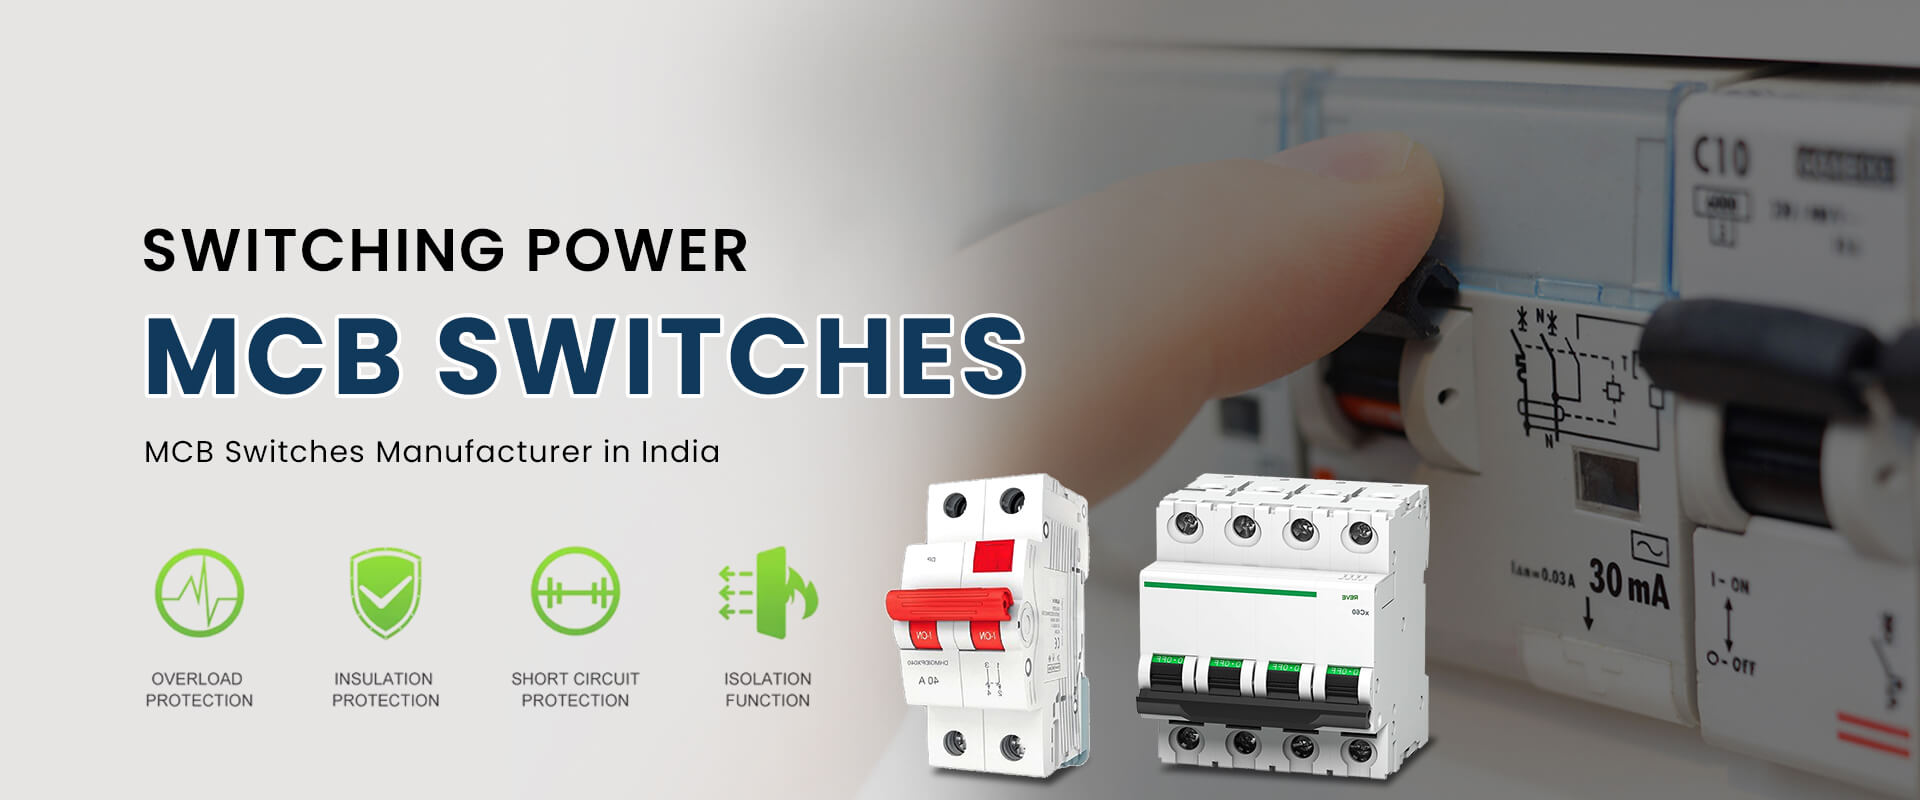 MCB Switches Manufacturer